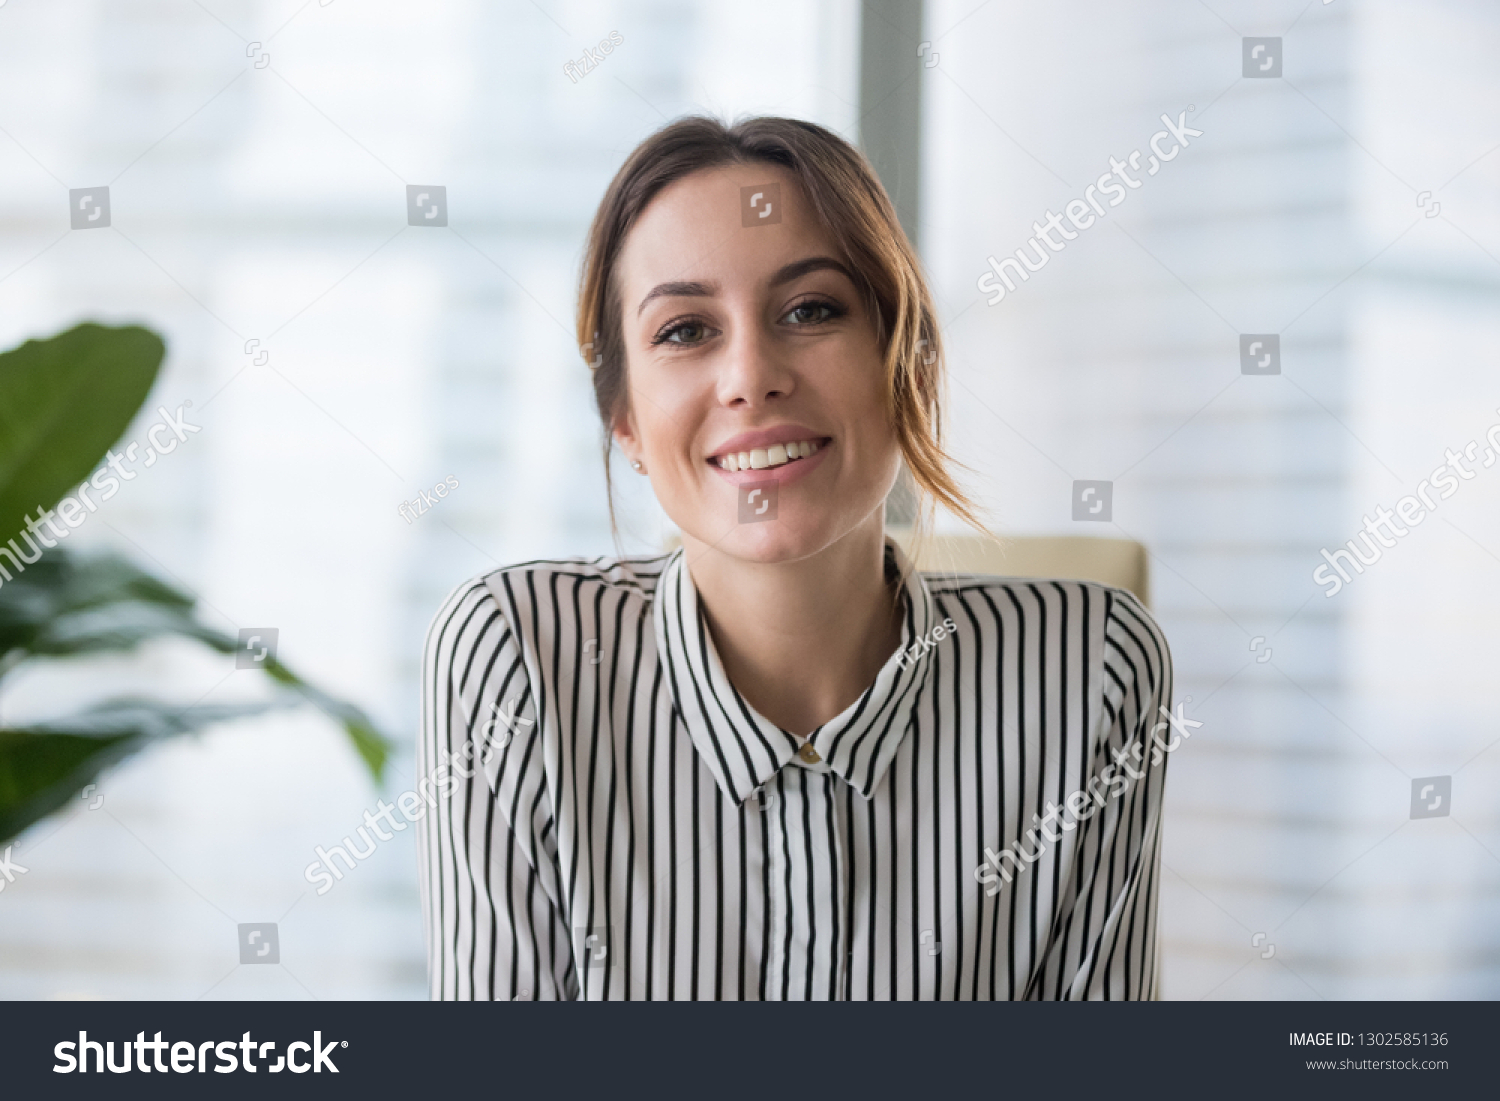 Smiling businesswoman looking at camera webcam make conference business call, recording video blog, talking with client, distance job interview, e-coaching, online training concept, headshot portrait #1302585136